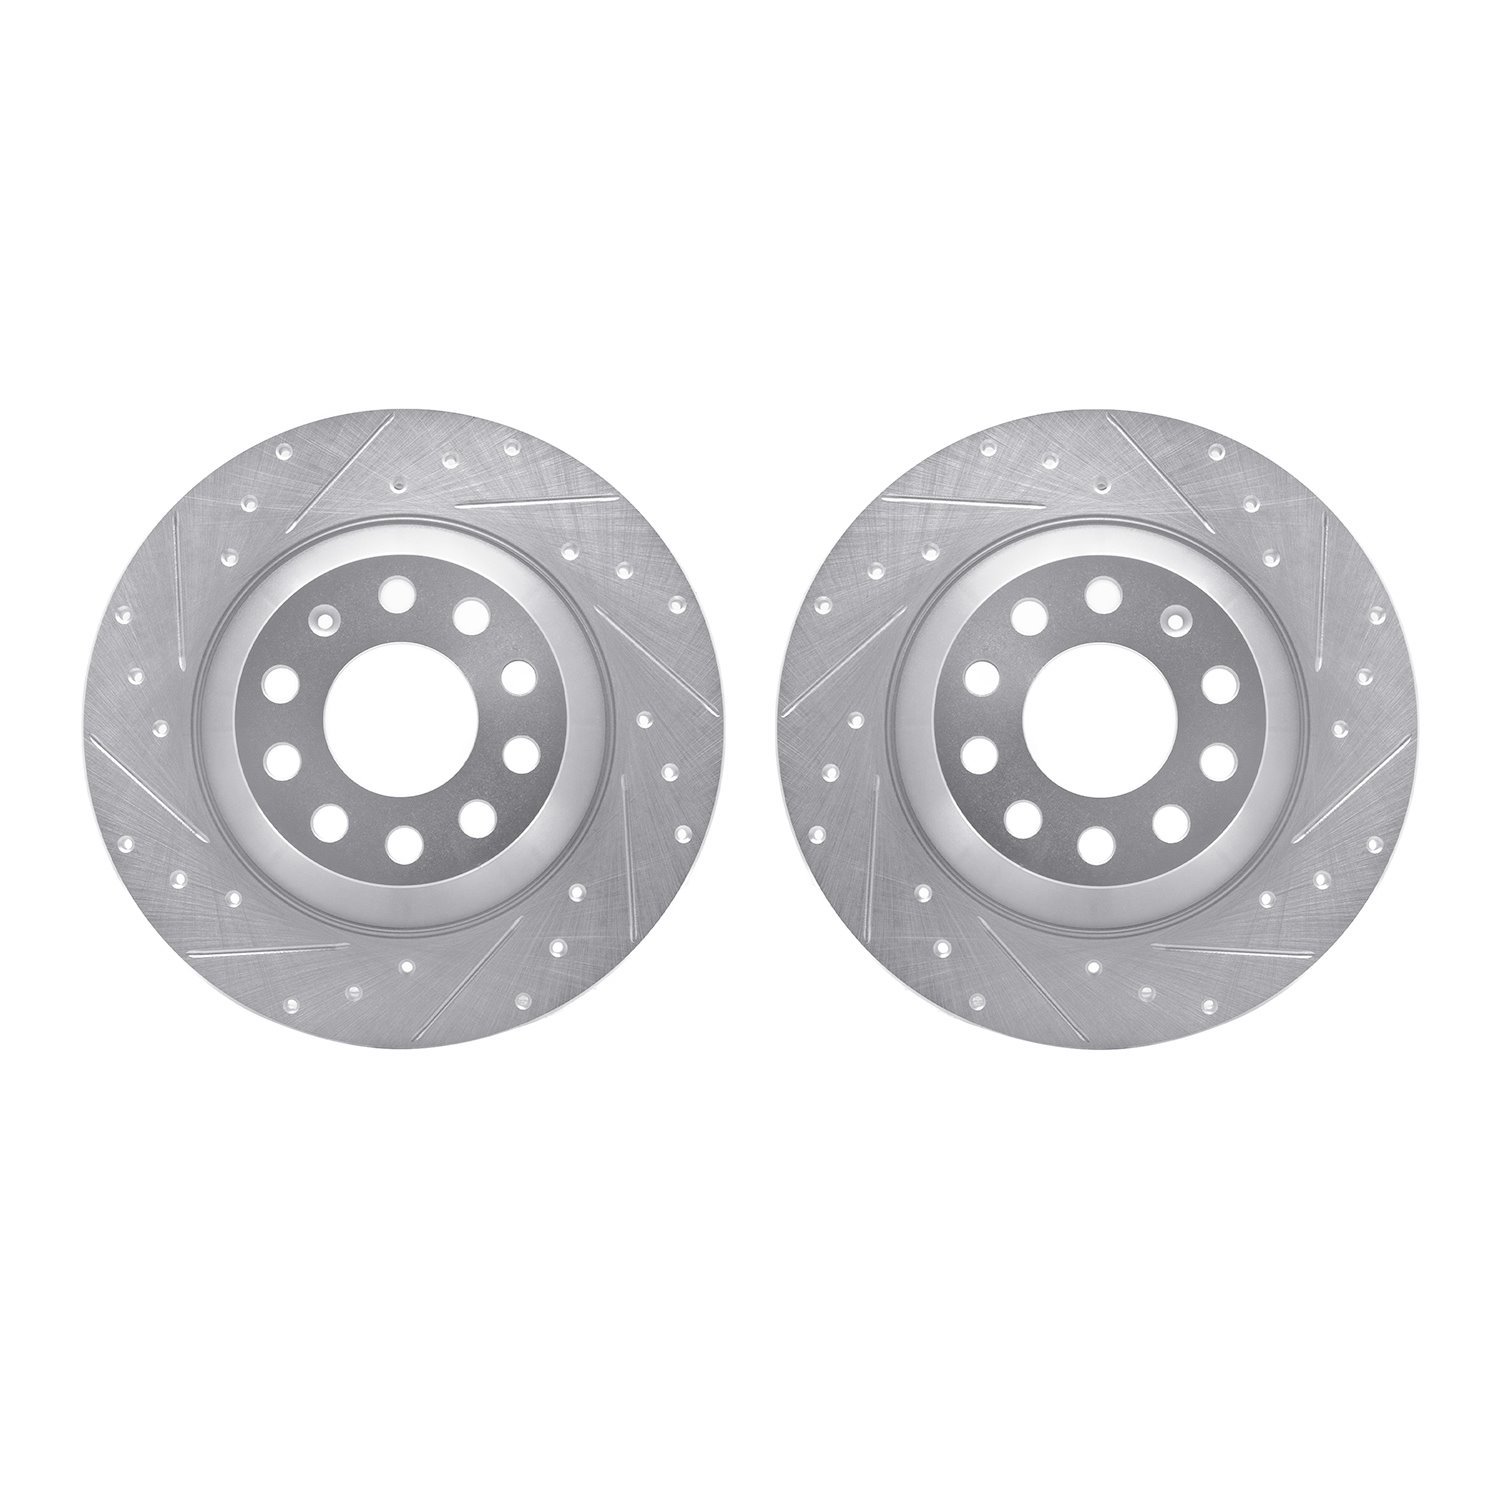 7002-73052 Drilled/Slotted Brake Rotors [Silver], 2005-2011 Audi/Volkswagen, Position: Rear